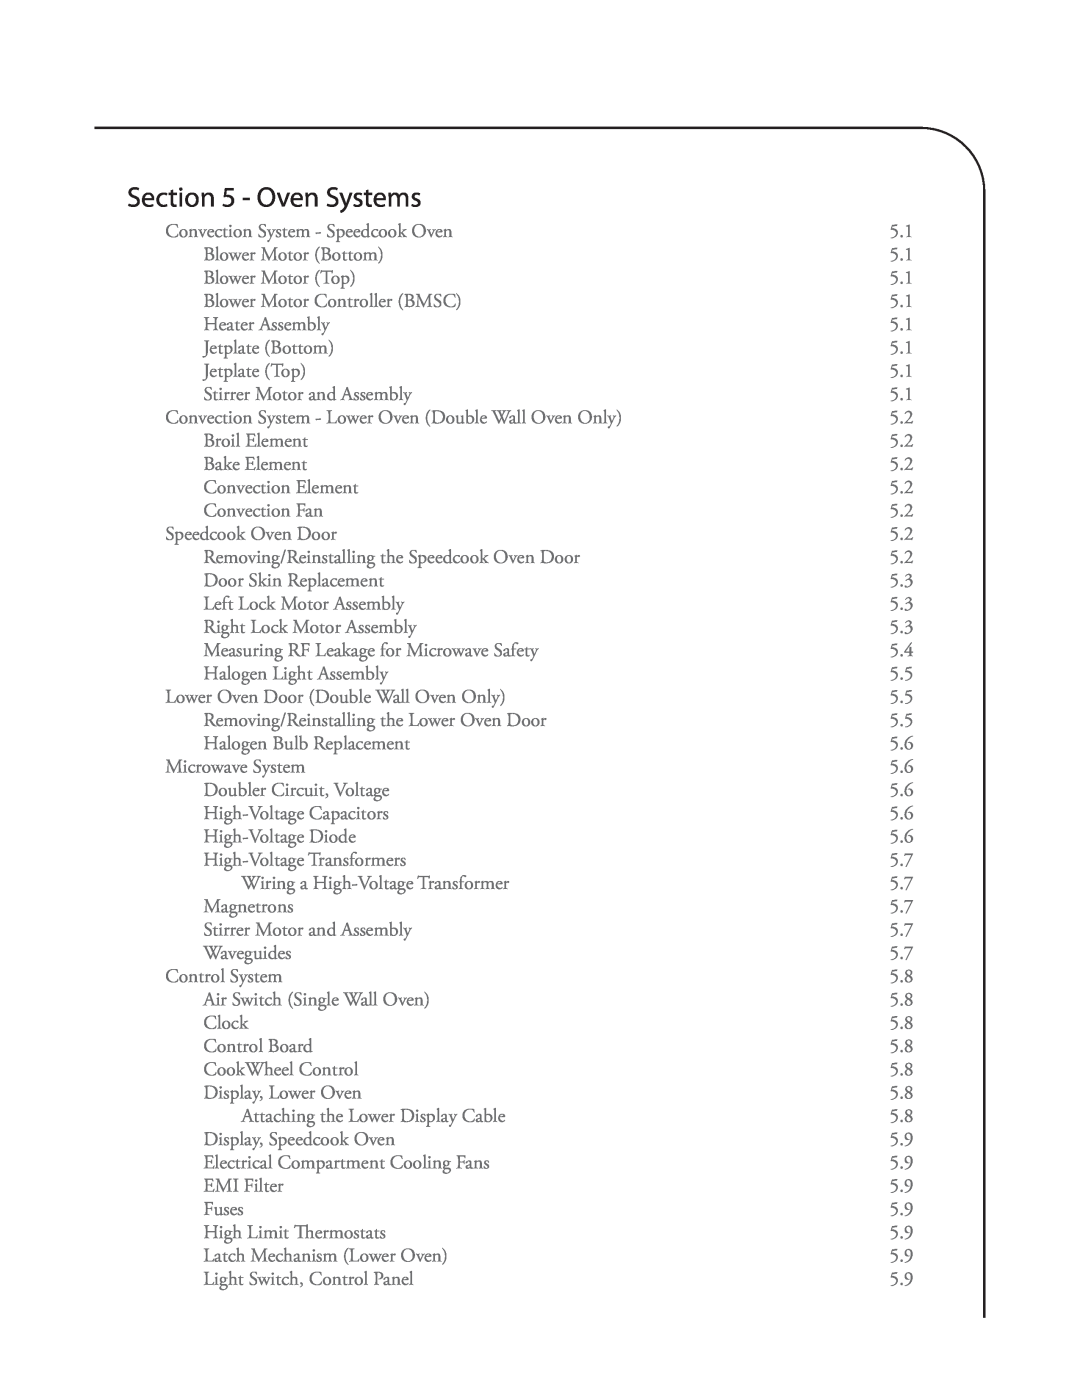 Turbo Chef Technologies Residential Single and Double Wall Oven service manual Oven Systems 